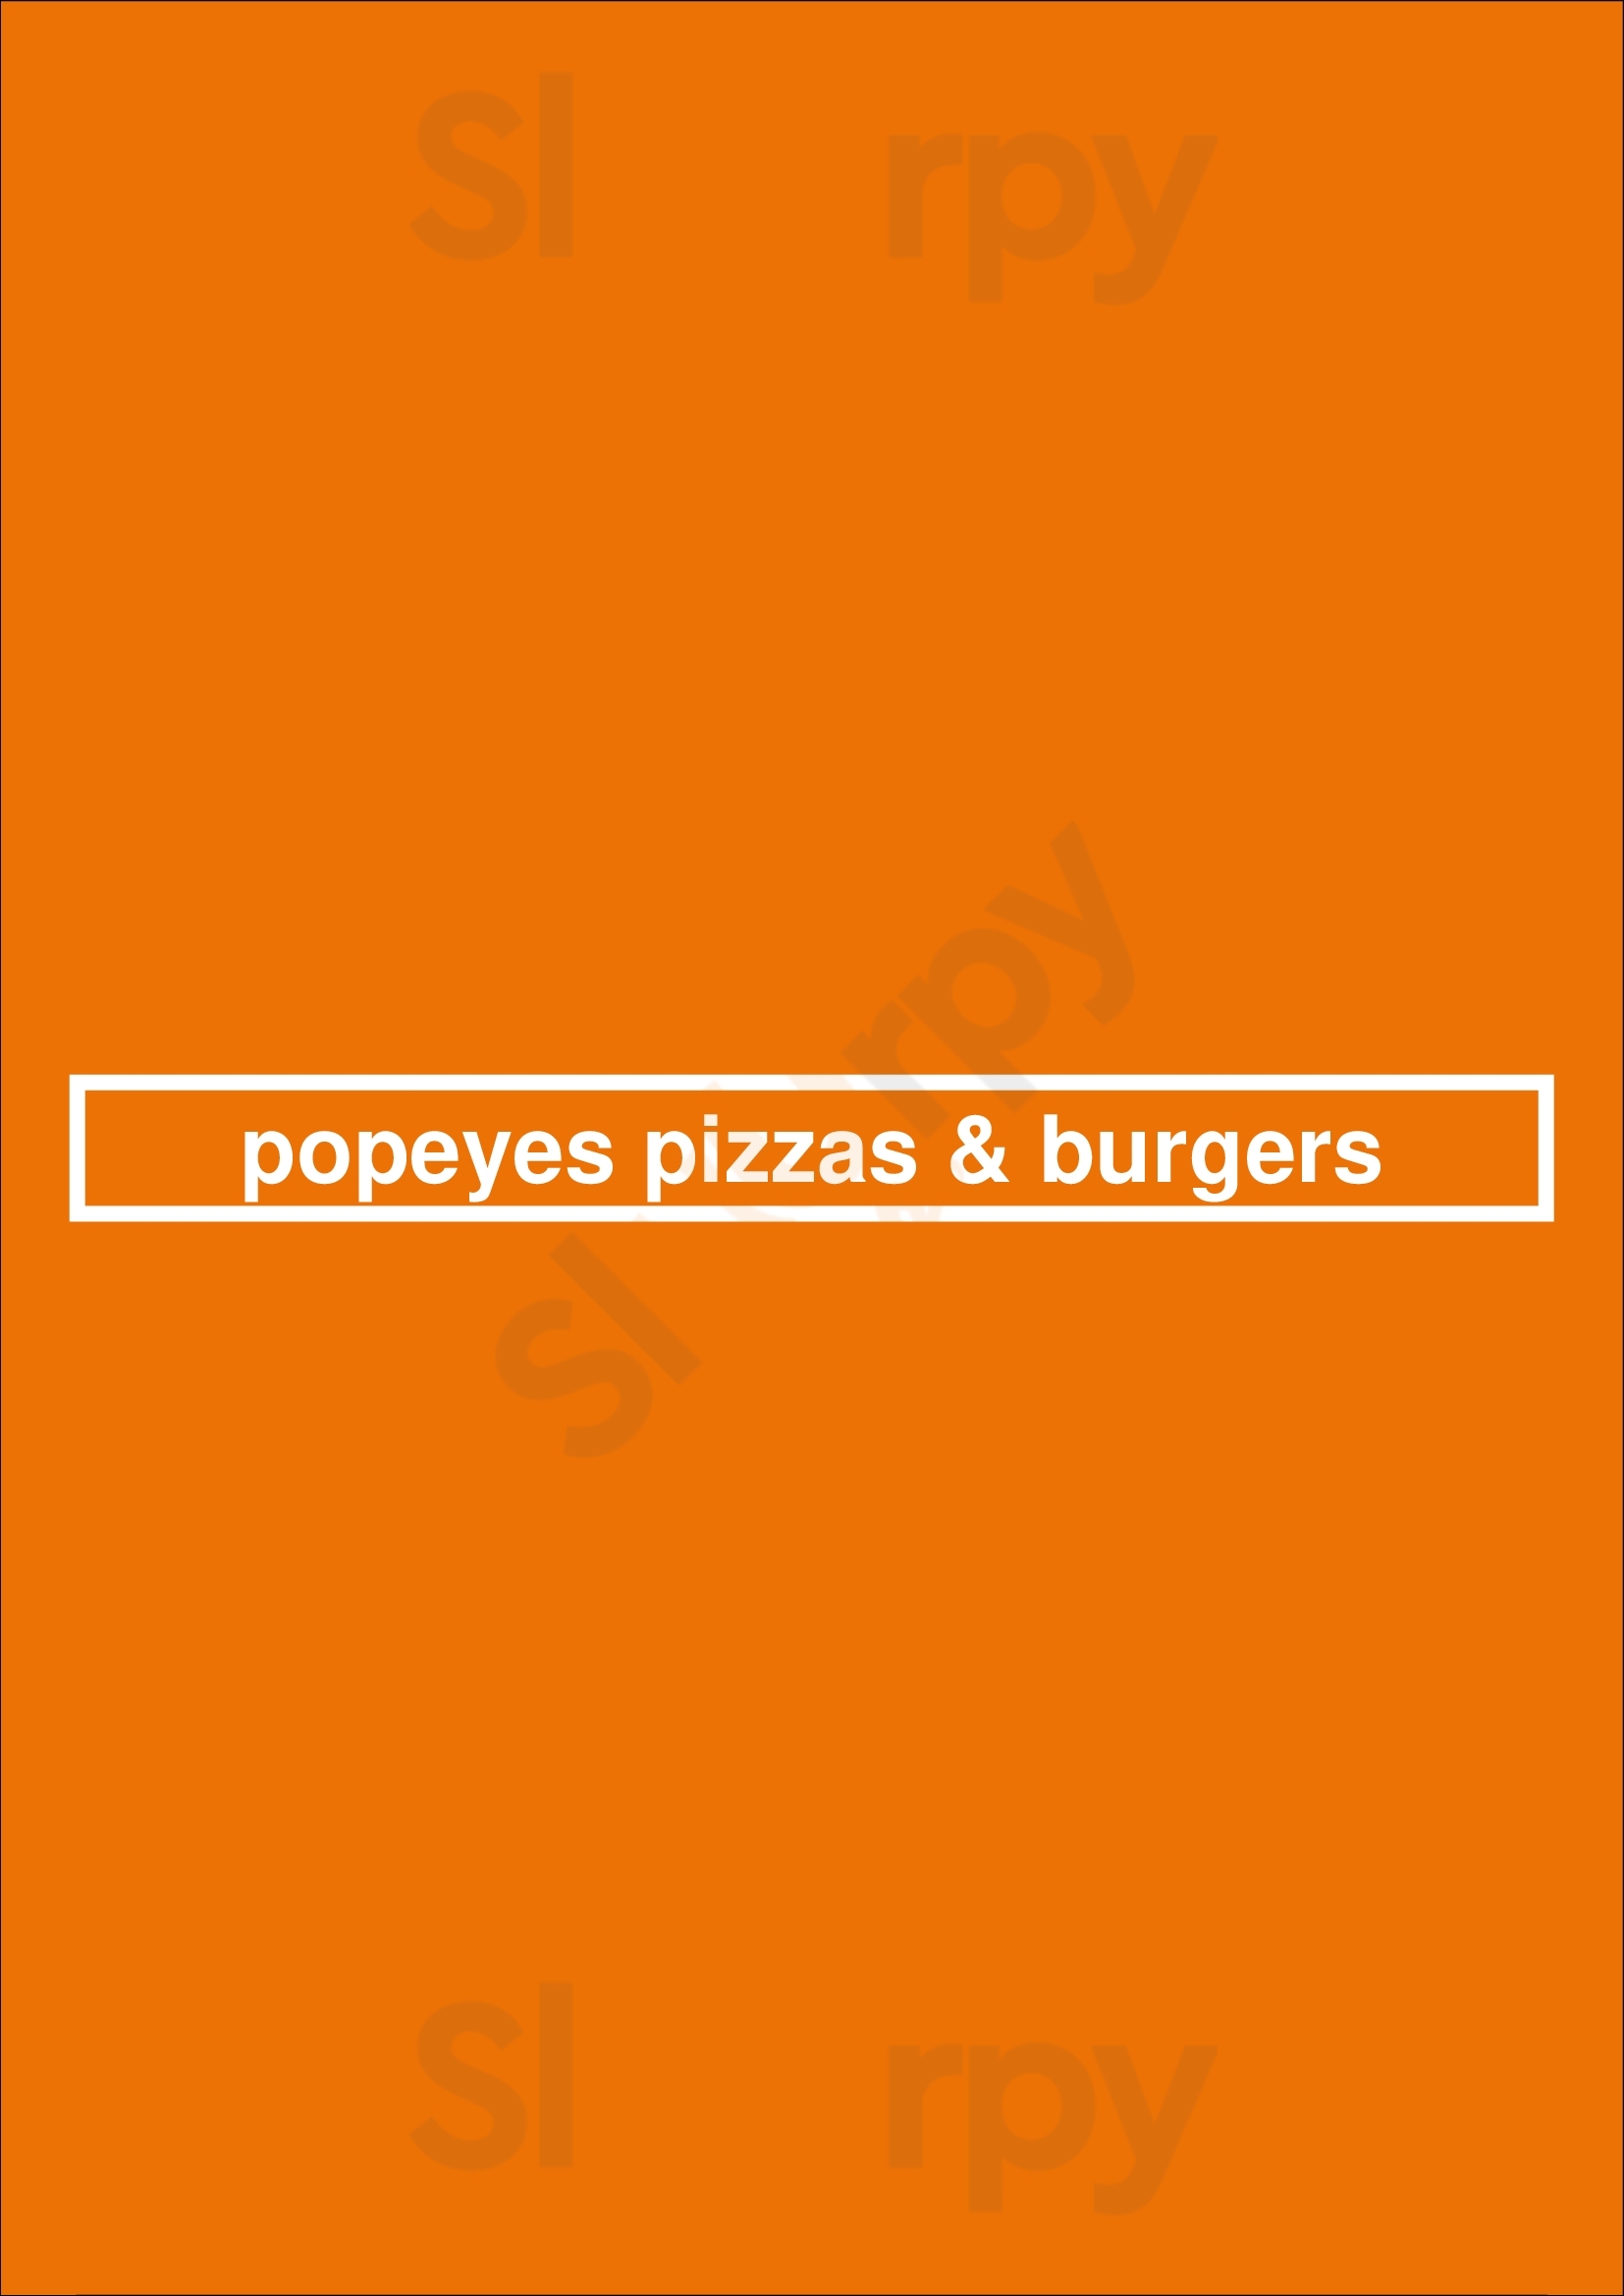 Popeyes Pizzas & Burgers Leicester Menu - 1